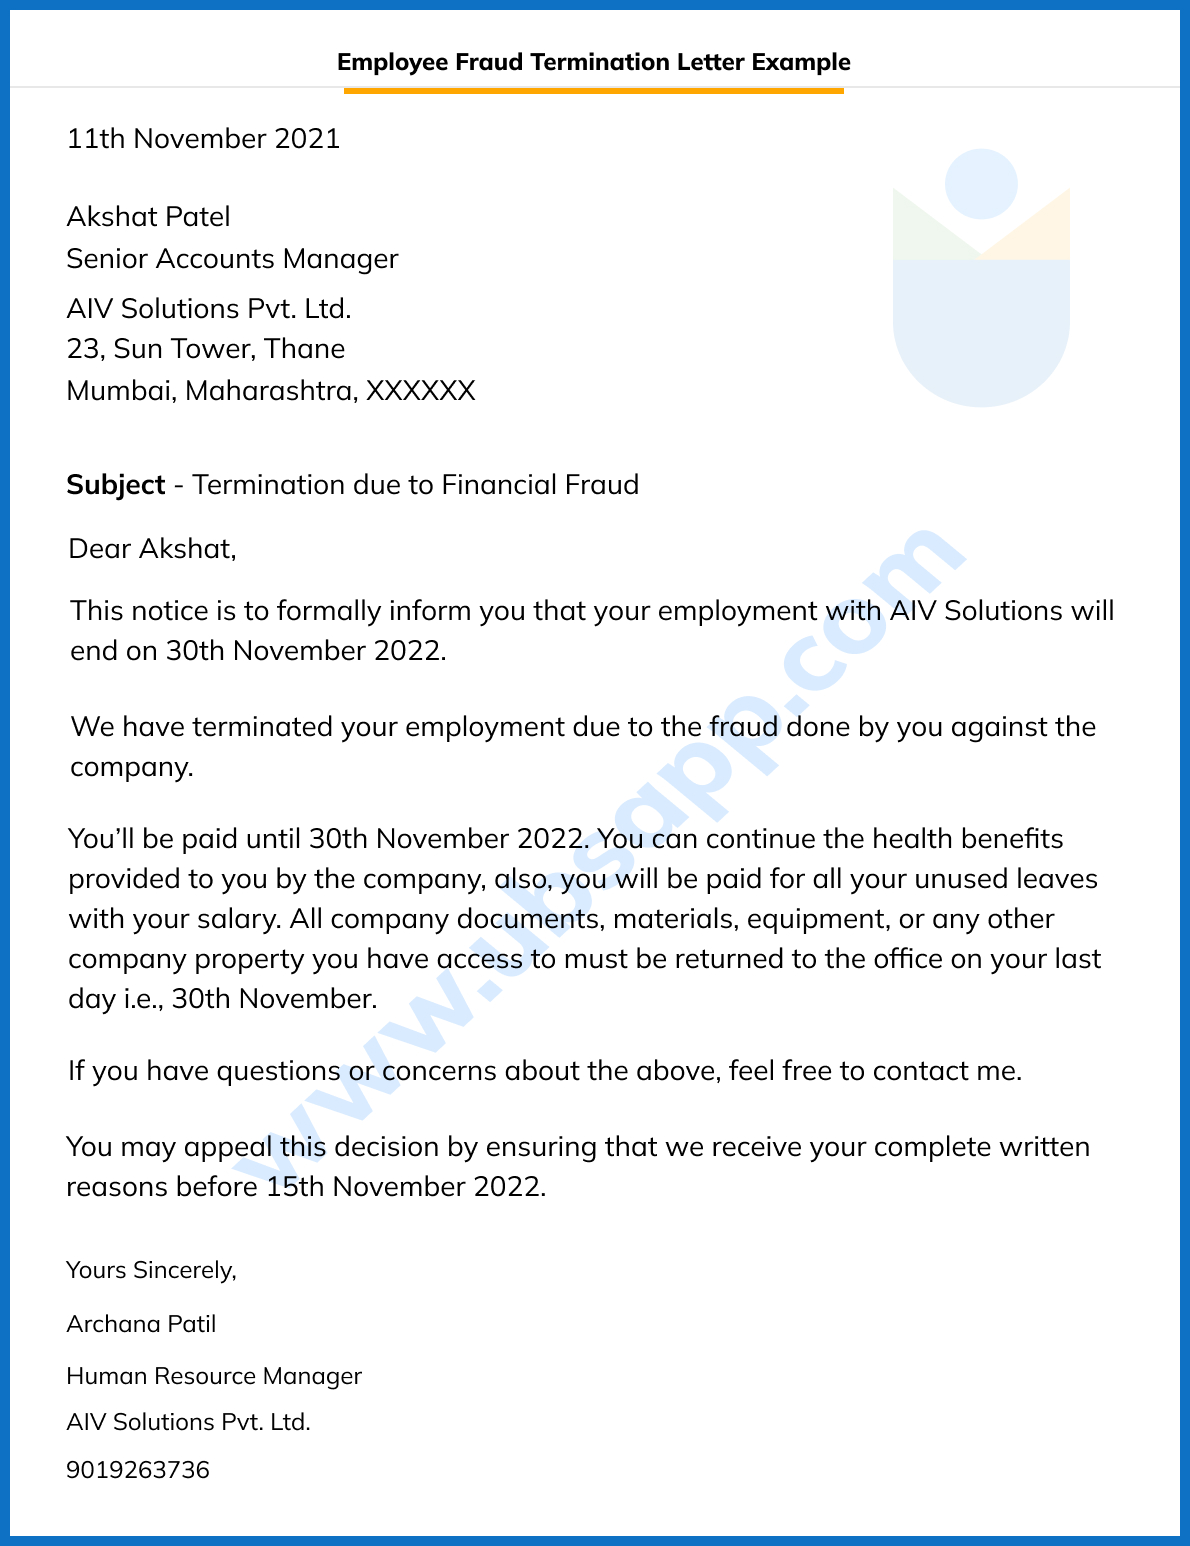 Employee Fraud Termination Letter Example